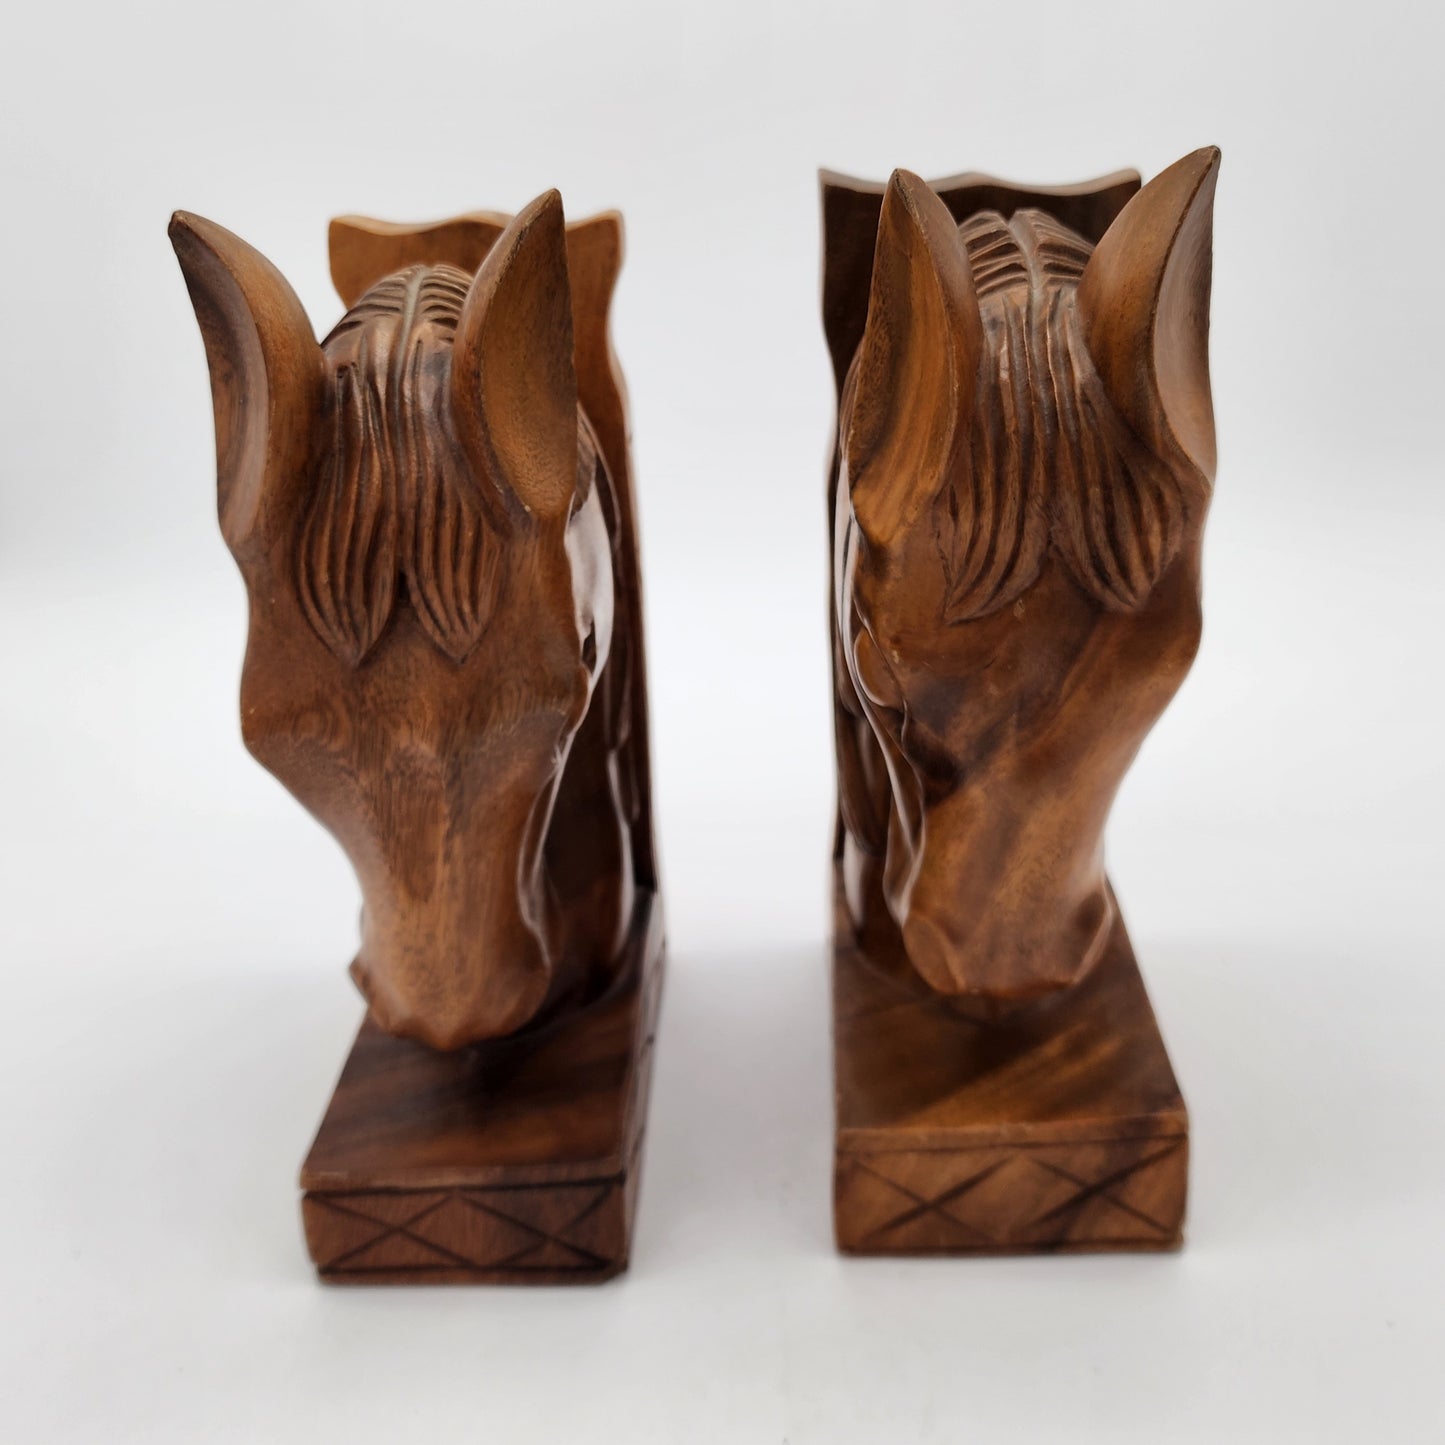 Carved Wood Horse Head Bookends